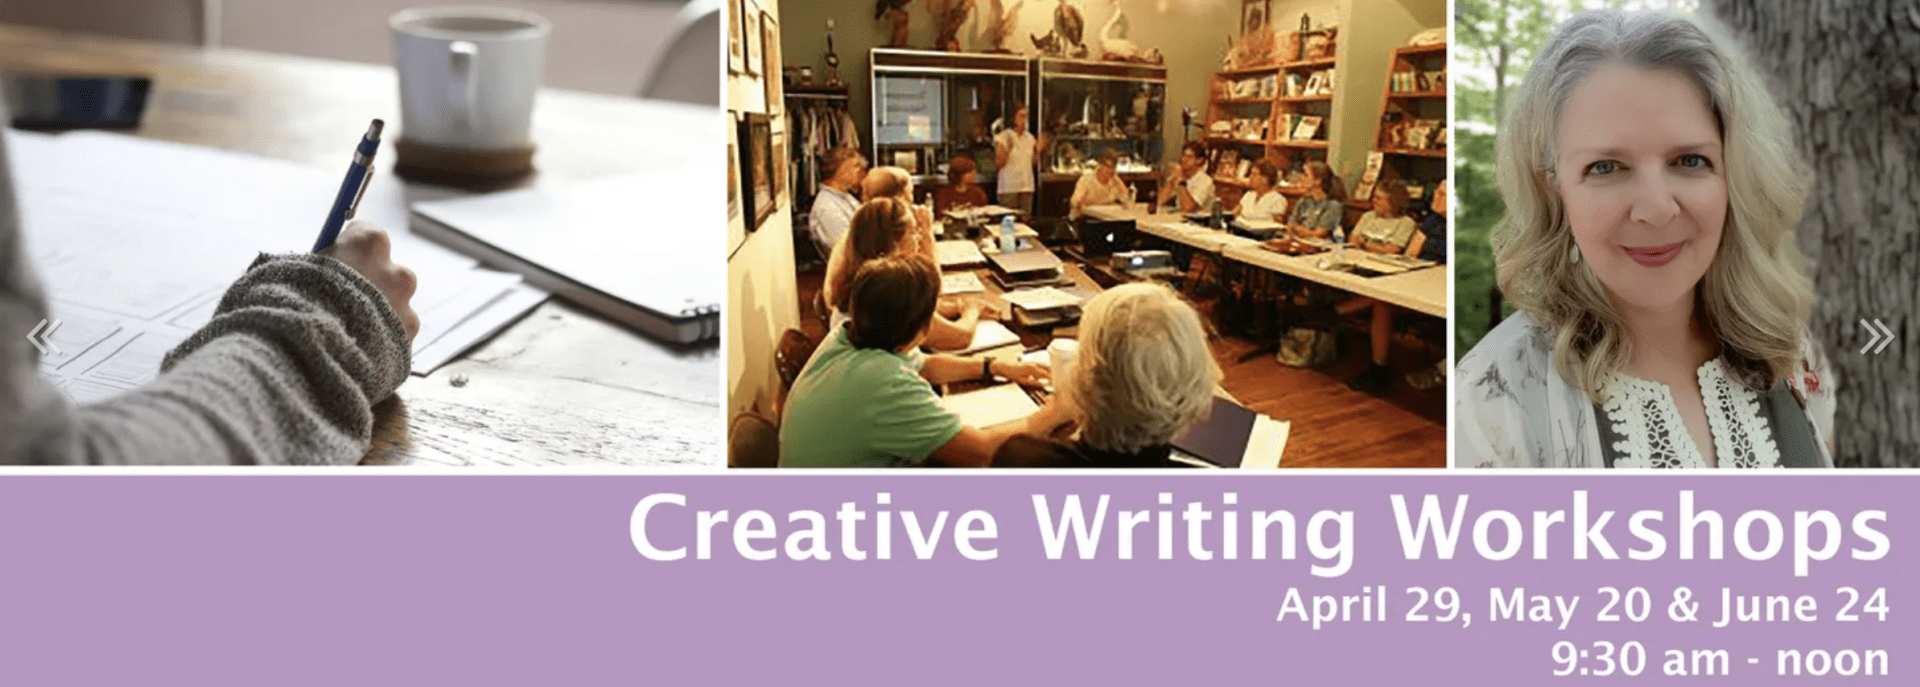 Creative Writing Workshops in Brentwood, TN at Owls Hill Nature Sanctuary.